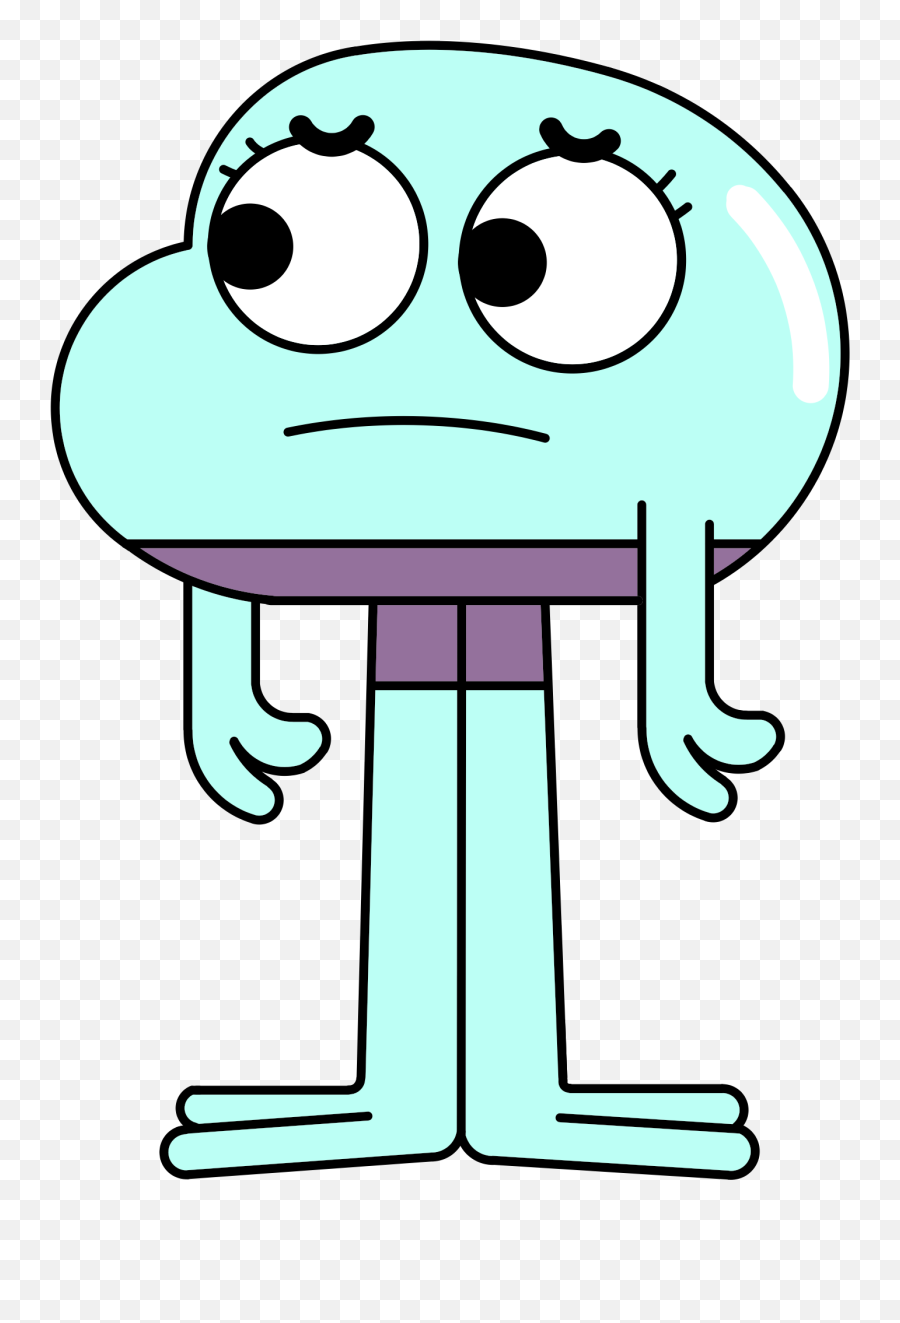 The Amazing World Of Gumball Png Image - Incredible World Of Chi Chi Ribbit,Gumball Png